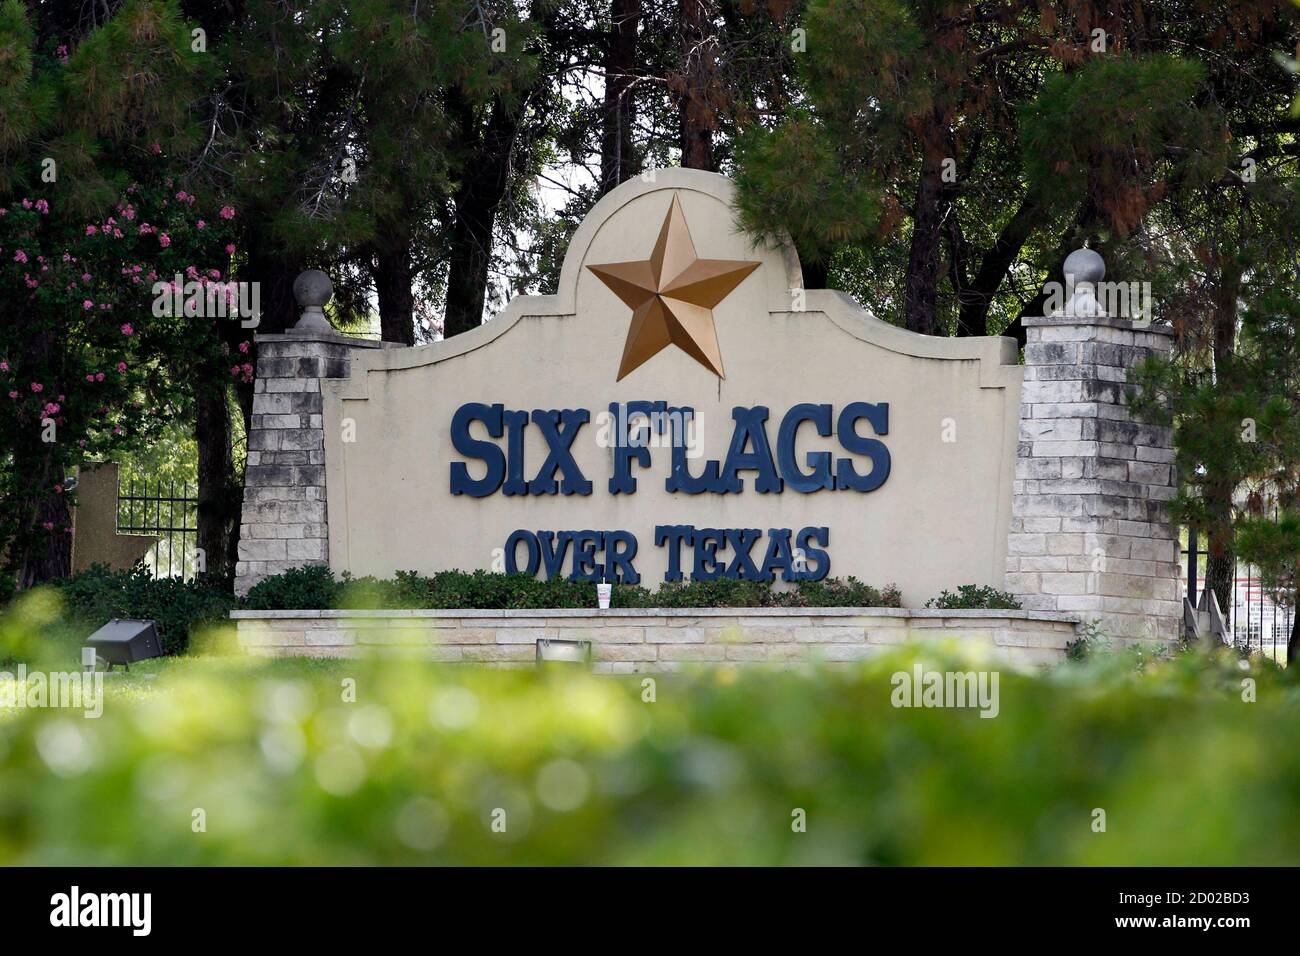 A sign at the entrance of the Six Flags Over Texas amusement park is seen in Arlington, Texas July 23, 2013. A woman who plunged from the Texas Giant roller coaster ride at the Six Flags Over Texas amusement park died of multiple traumatic injuries in a fall that was ruled an accident, authorities said on Monday. REUTERS/Mike Stone (UNITED STATES - Tags: SOCIETY) Stock Photo